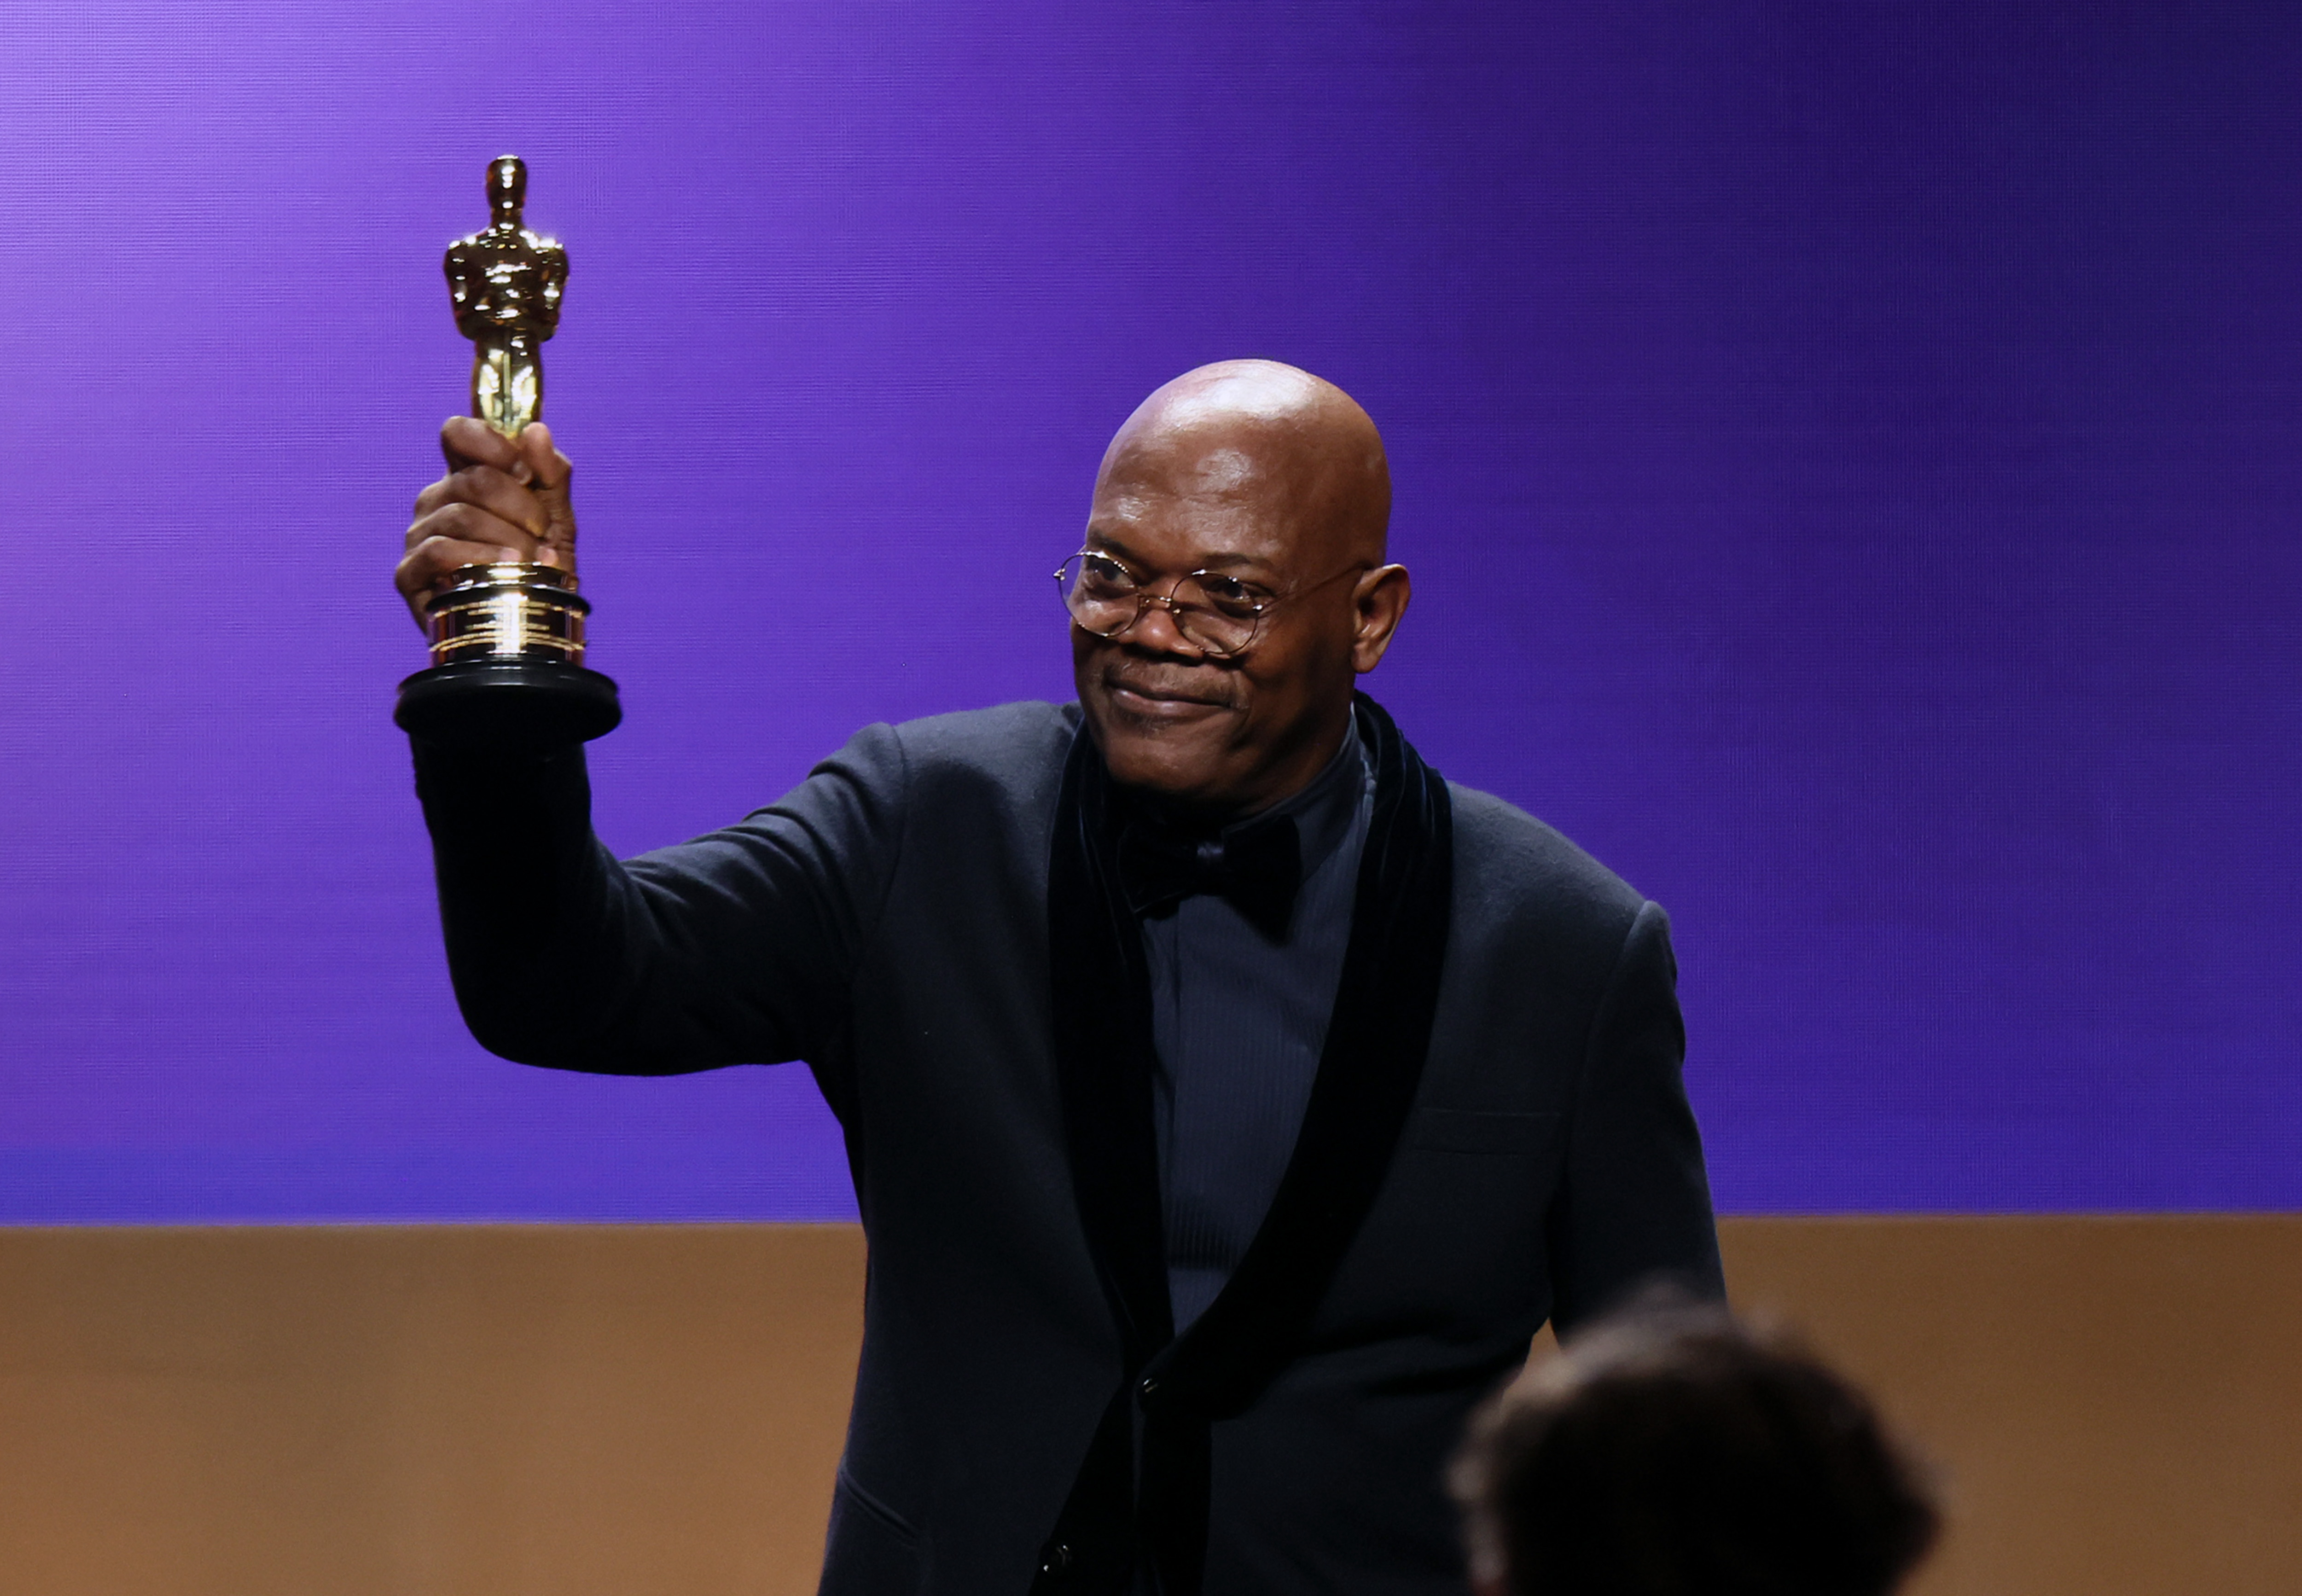 Samuel L. Jackson receives an honorary Oscar for a lifetime achievement in movies